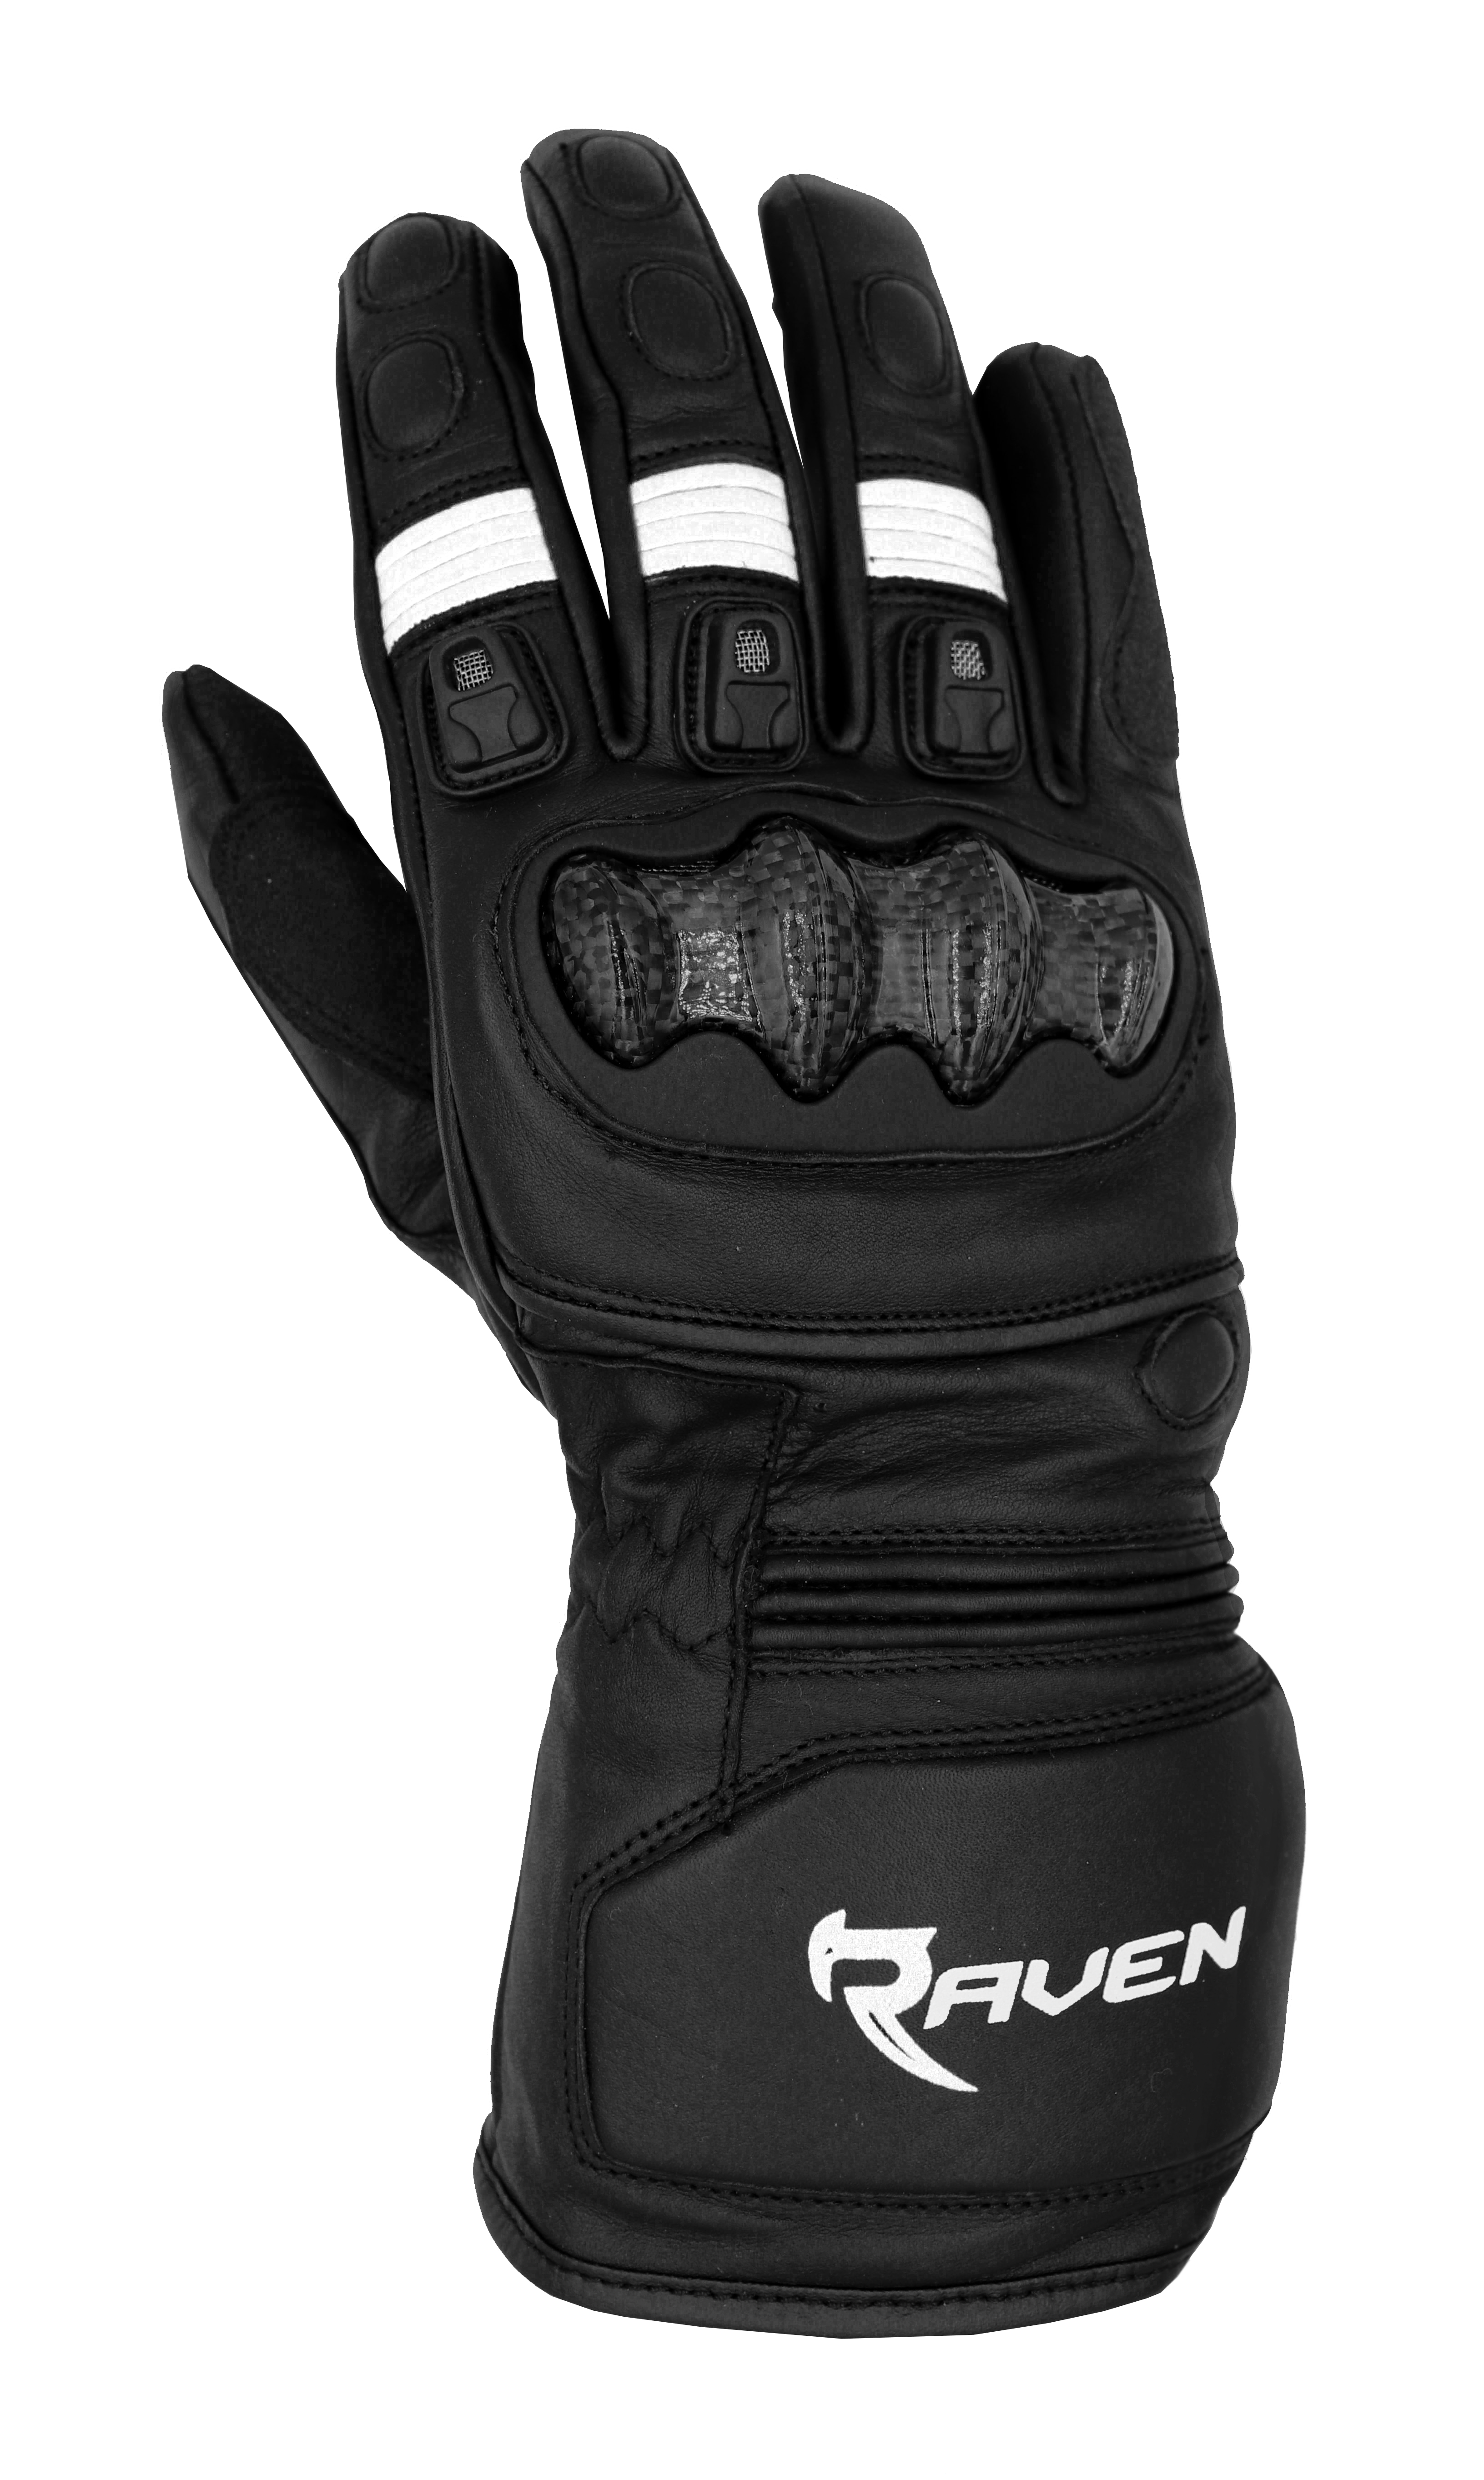 ROGUE - Black and White Leather Motorcycle Long Cuff Gauntlet Glove by RAVEN Moto